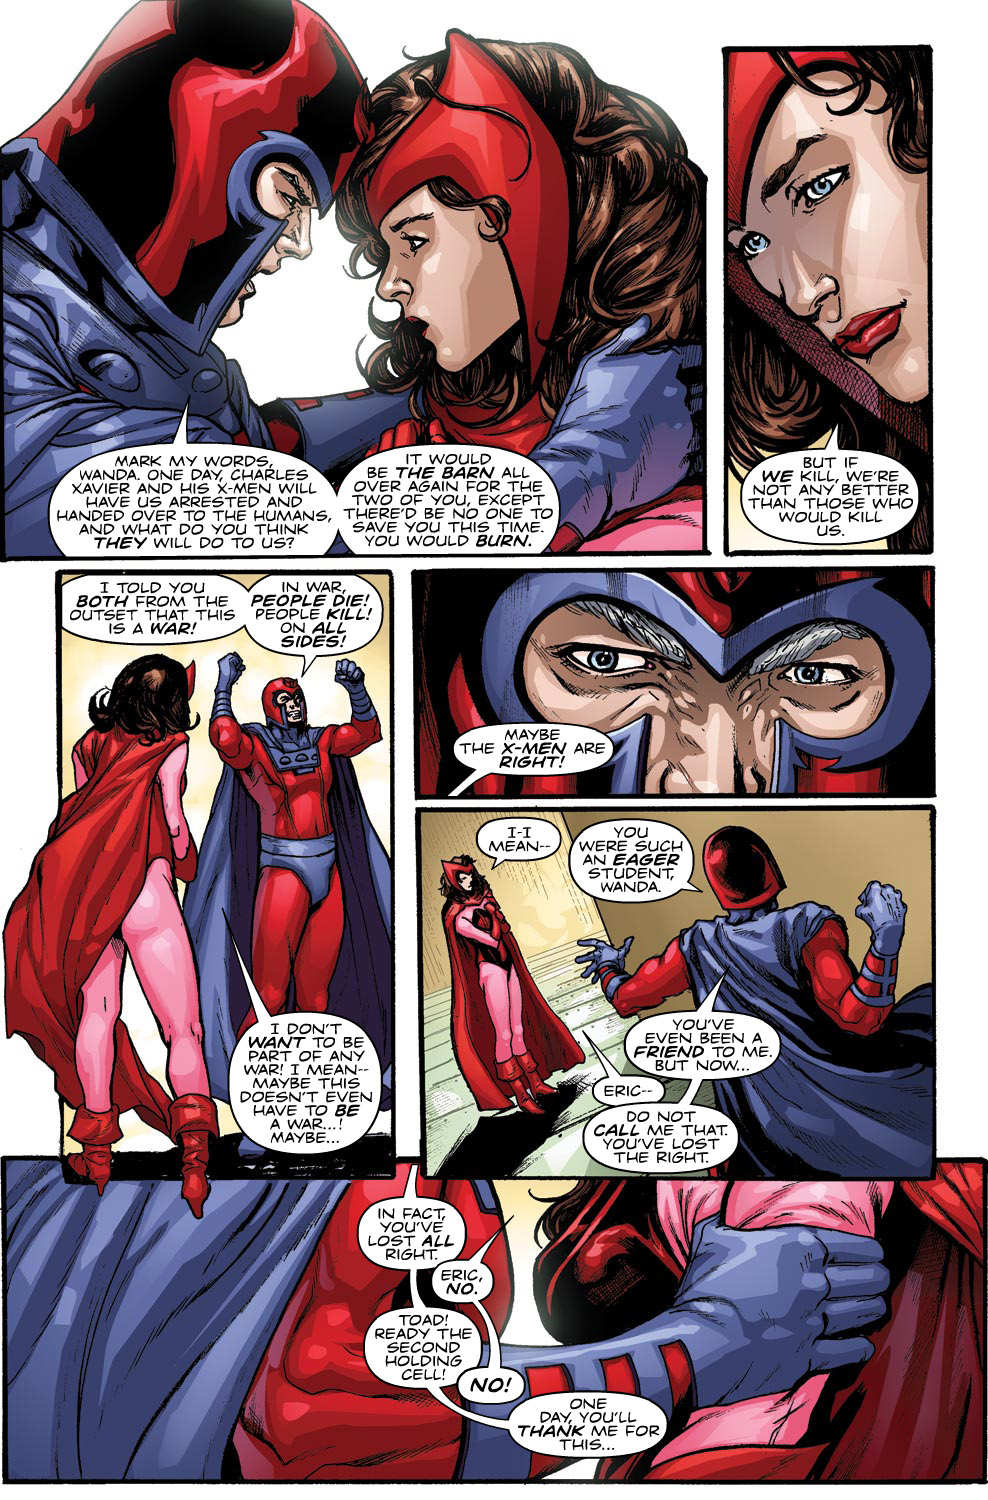 Magneto Scarlet Witch Porn - Avengers Origins The Scarlet Witch Quicksilver Full | Read Avengers Origins  The Scarlet Witch Quicksilver Full comic online in high quality. Read Full  Comic online for free - Read comics online in